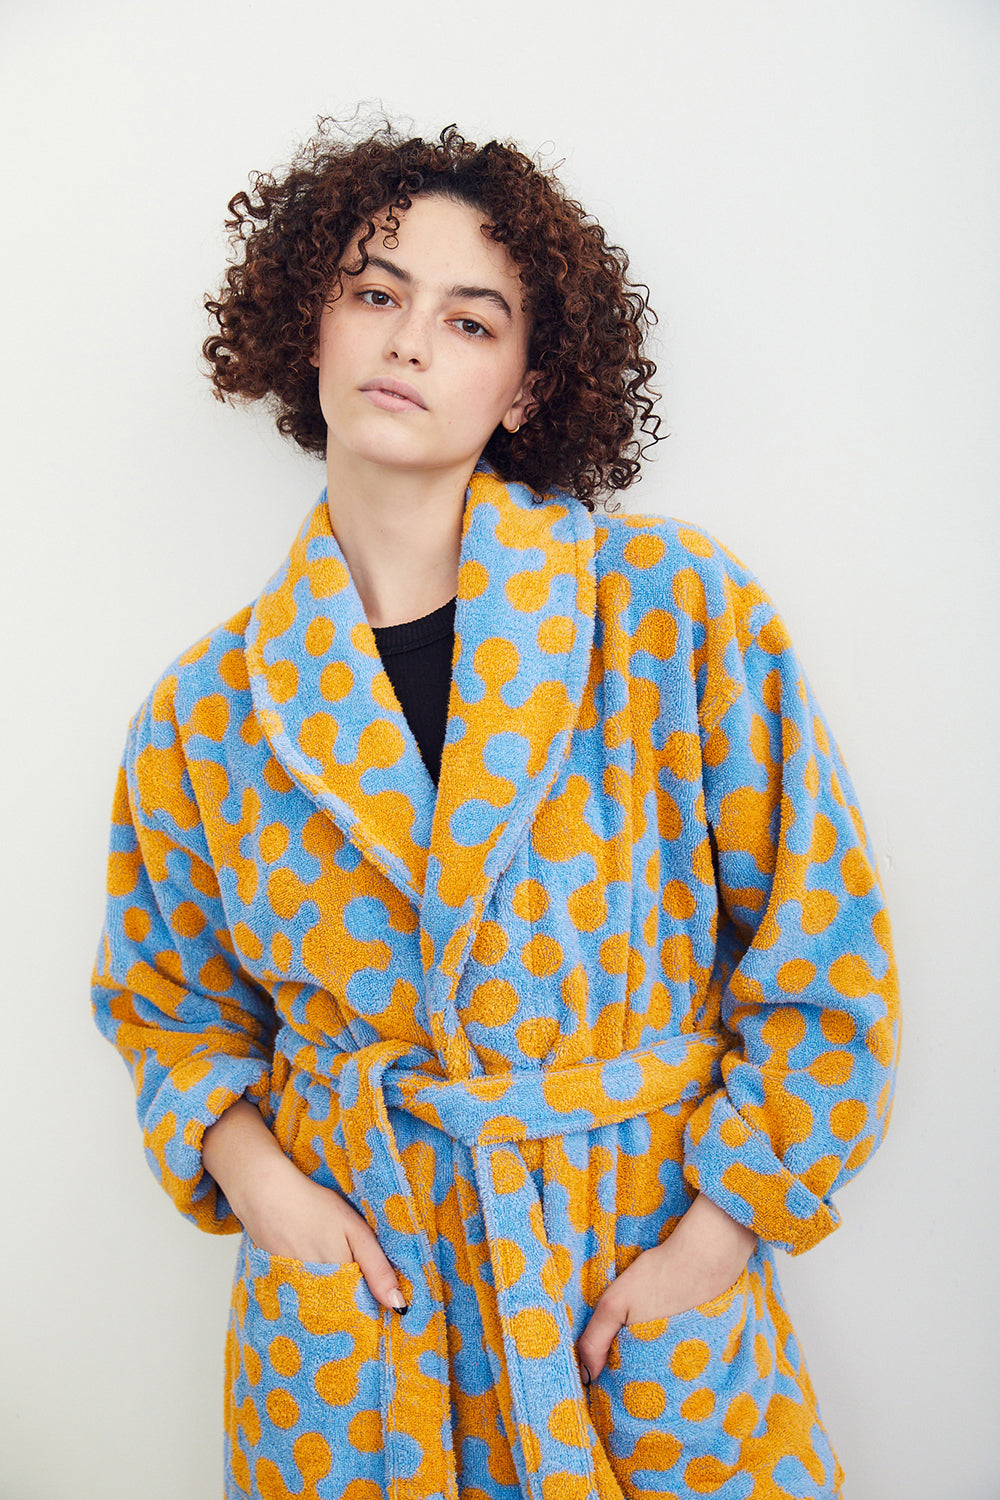 Bathrobe in Atom pattern. Cotton terry bathrobe with shawl collar, patch pockets, and tie in cornflower and marigold Atom pattern. 100% cotton terry, 450 gsm. Made in Turkey. This item is Oeko-Tex Standard 100 certified (no harmful chemicals were used during its production).